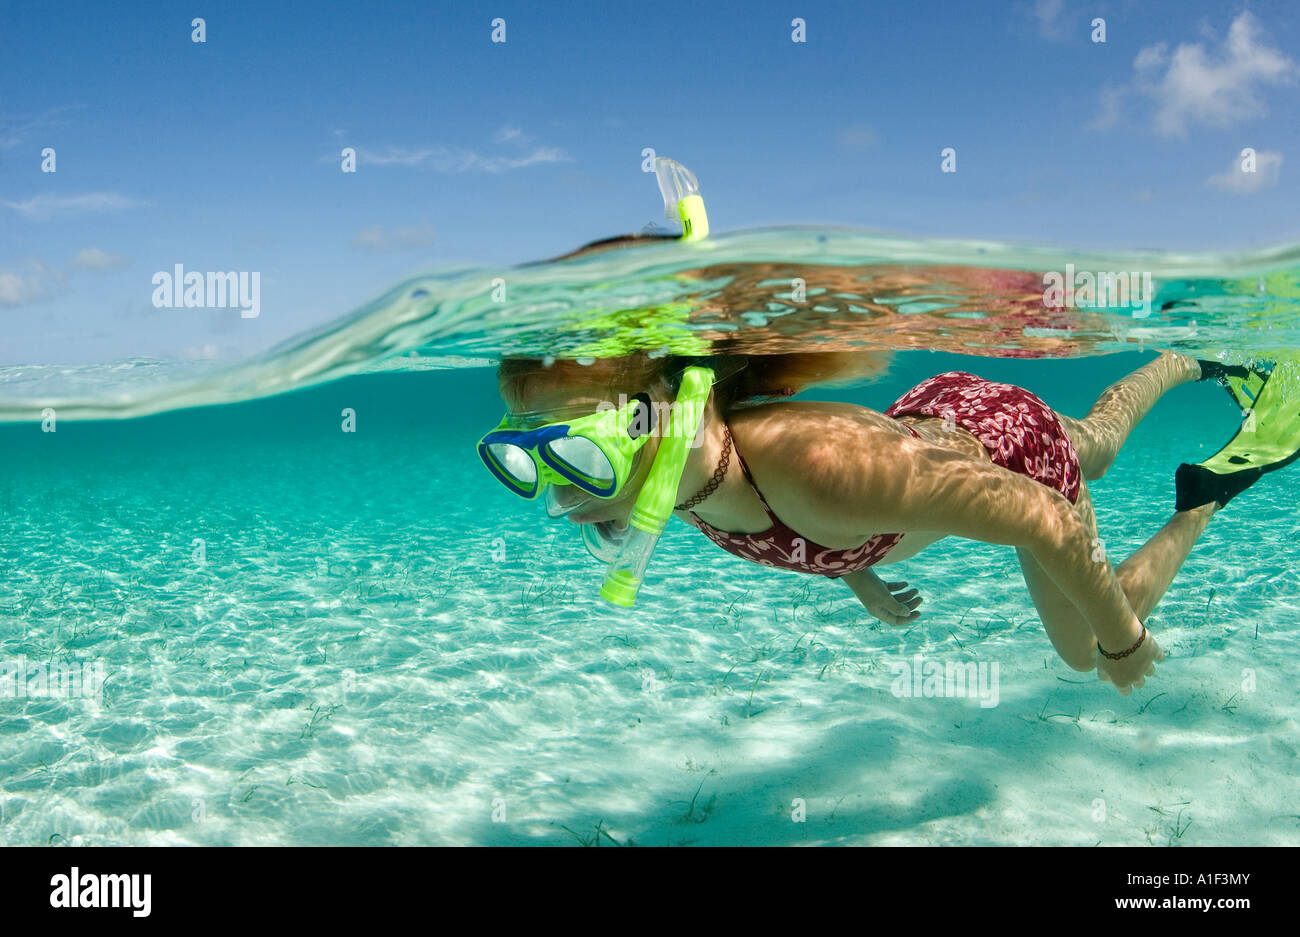 A YOUNG GIRL PROPELS HERSELF WHILE SNORKELING IN THE CLEAR WATERS OF THE EXUMA ISLAND CHAIN Stock Photo